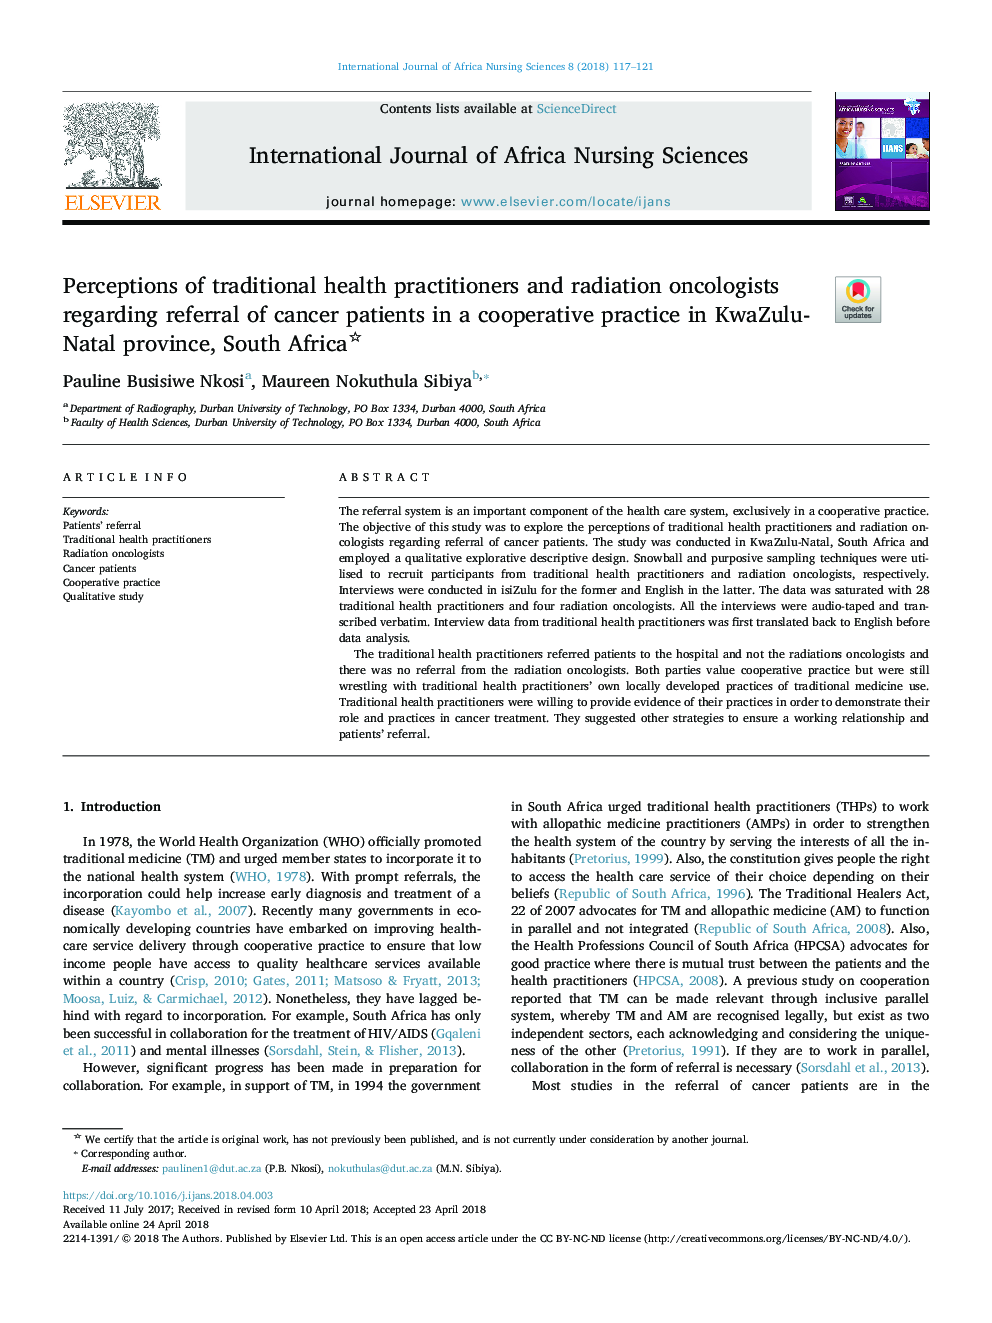 Perceptions of traditional health practitioners and radiation oncologists regarding referral of cancer patients in a cooperative practice in KwaZulu-Natal province, South Africa